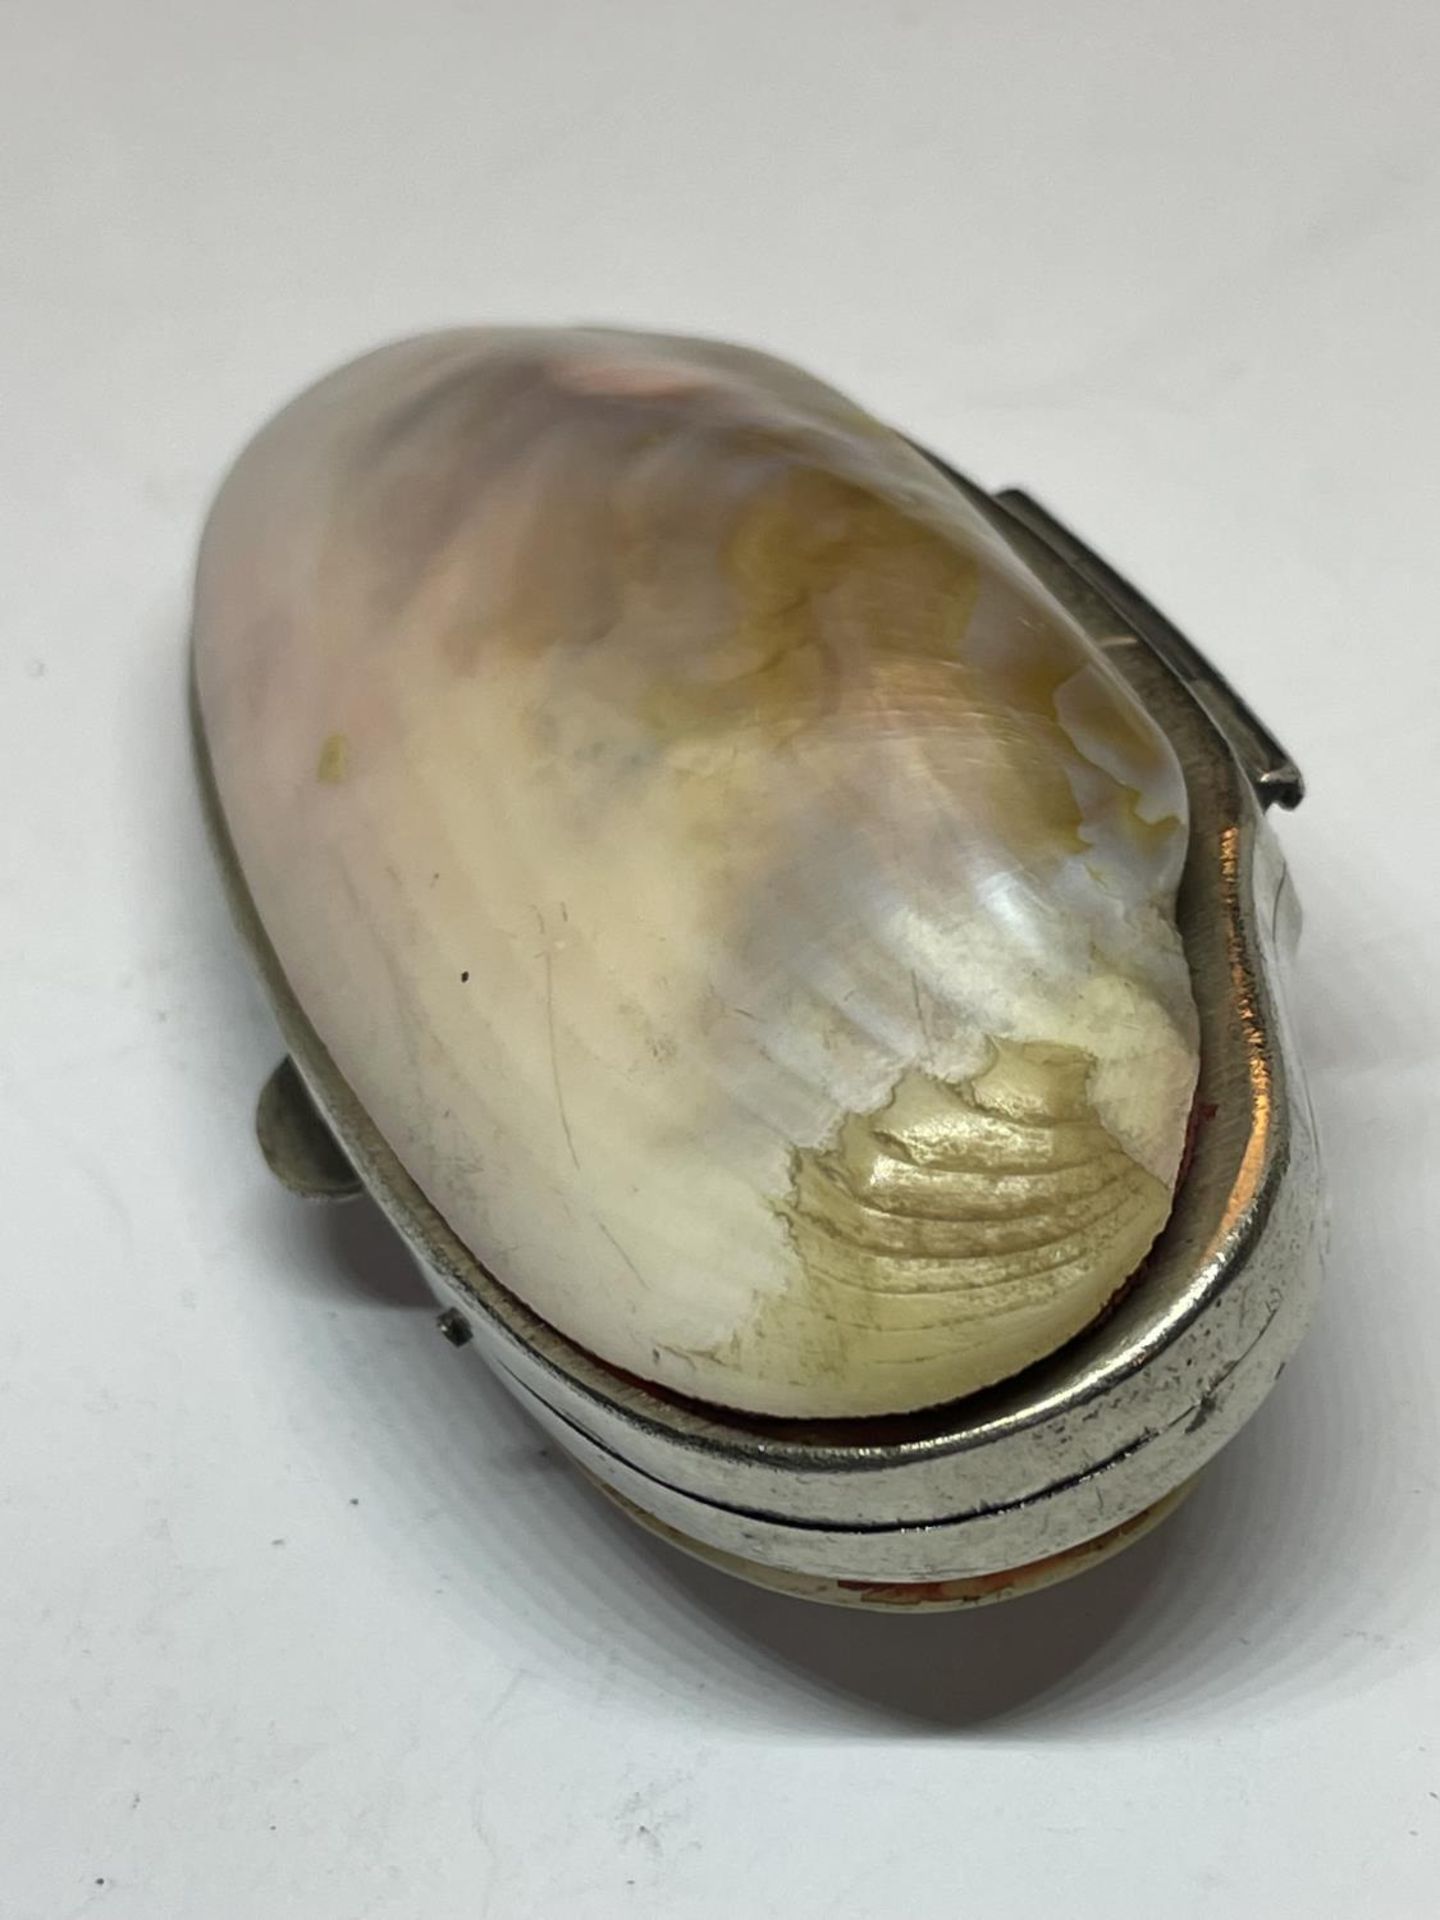 A PURSE MADE OUT OF A SHELL WITH A FOLDED INTERIOR - Image 2 of 3